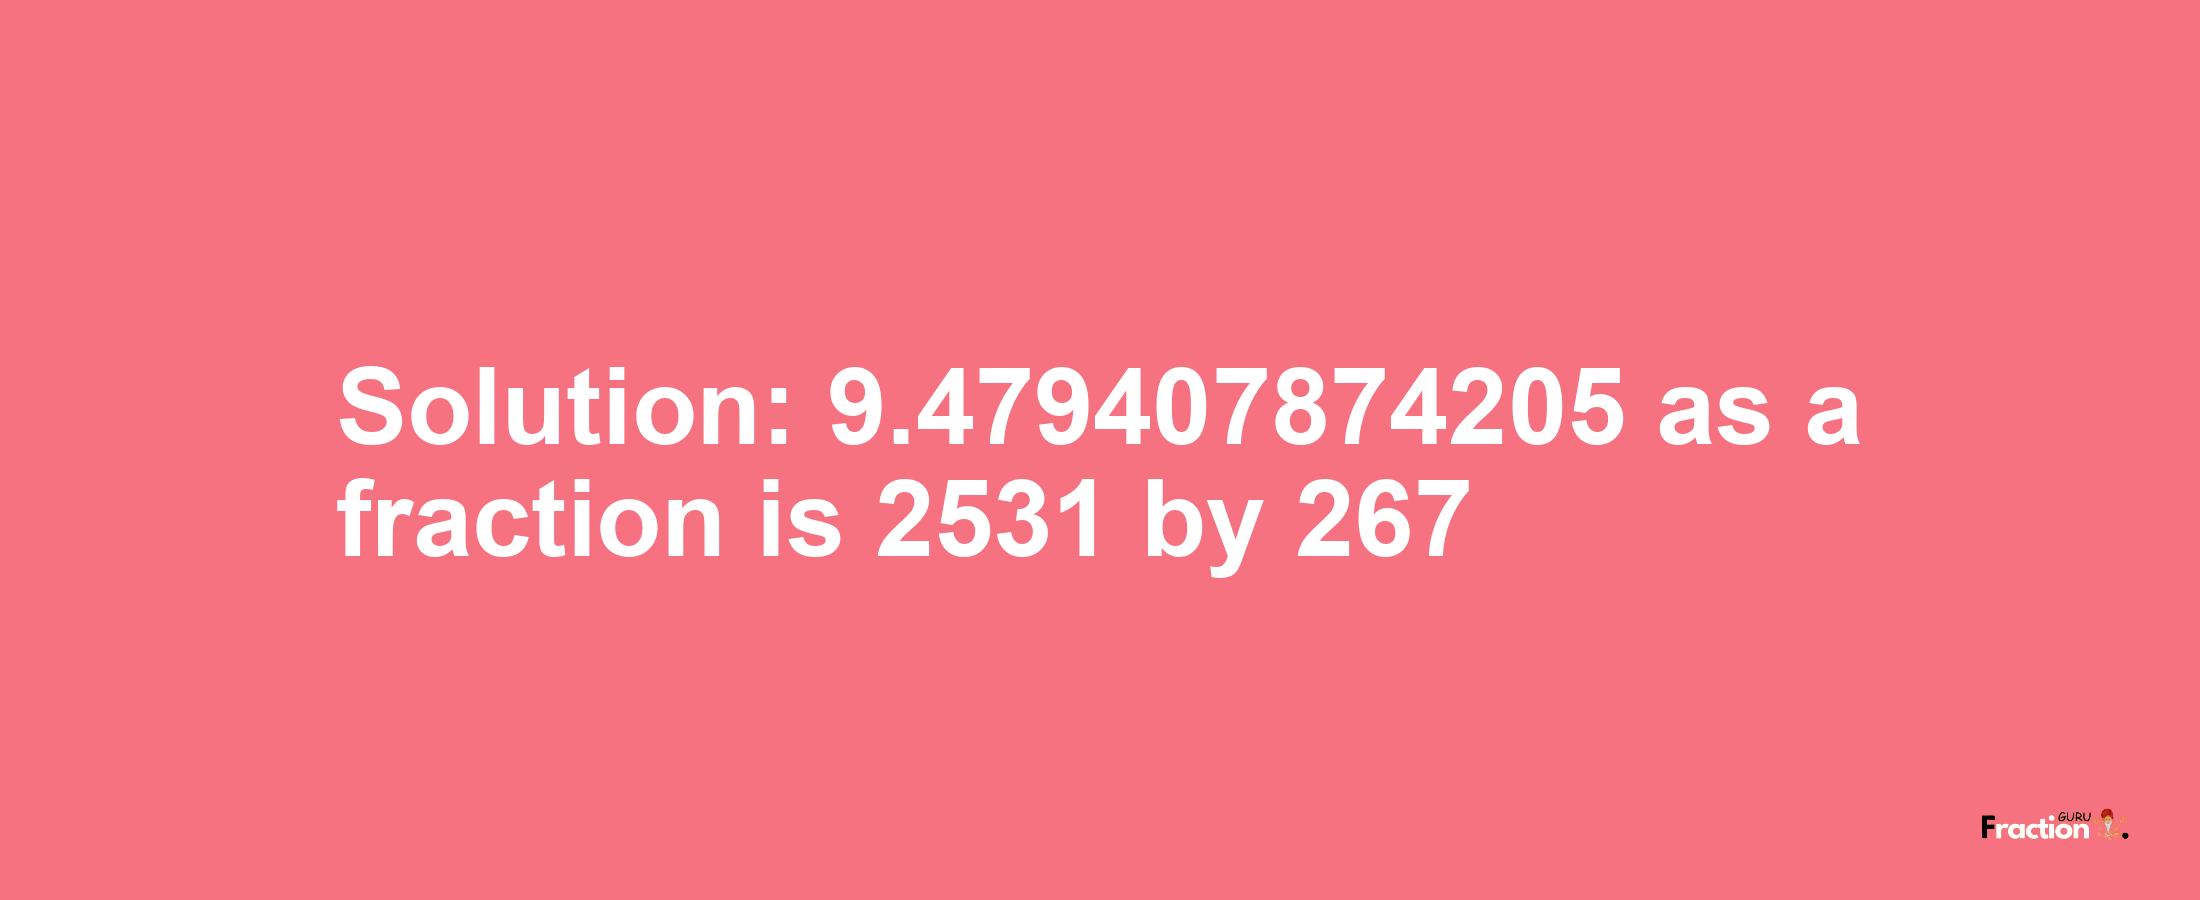 Solution:9.479407874205 as a fraction is 2531/267